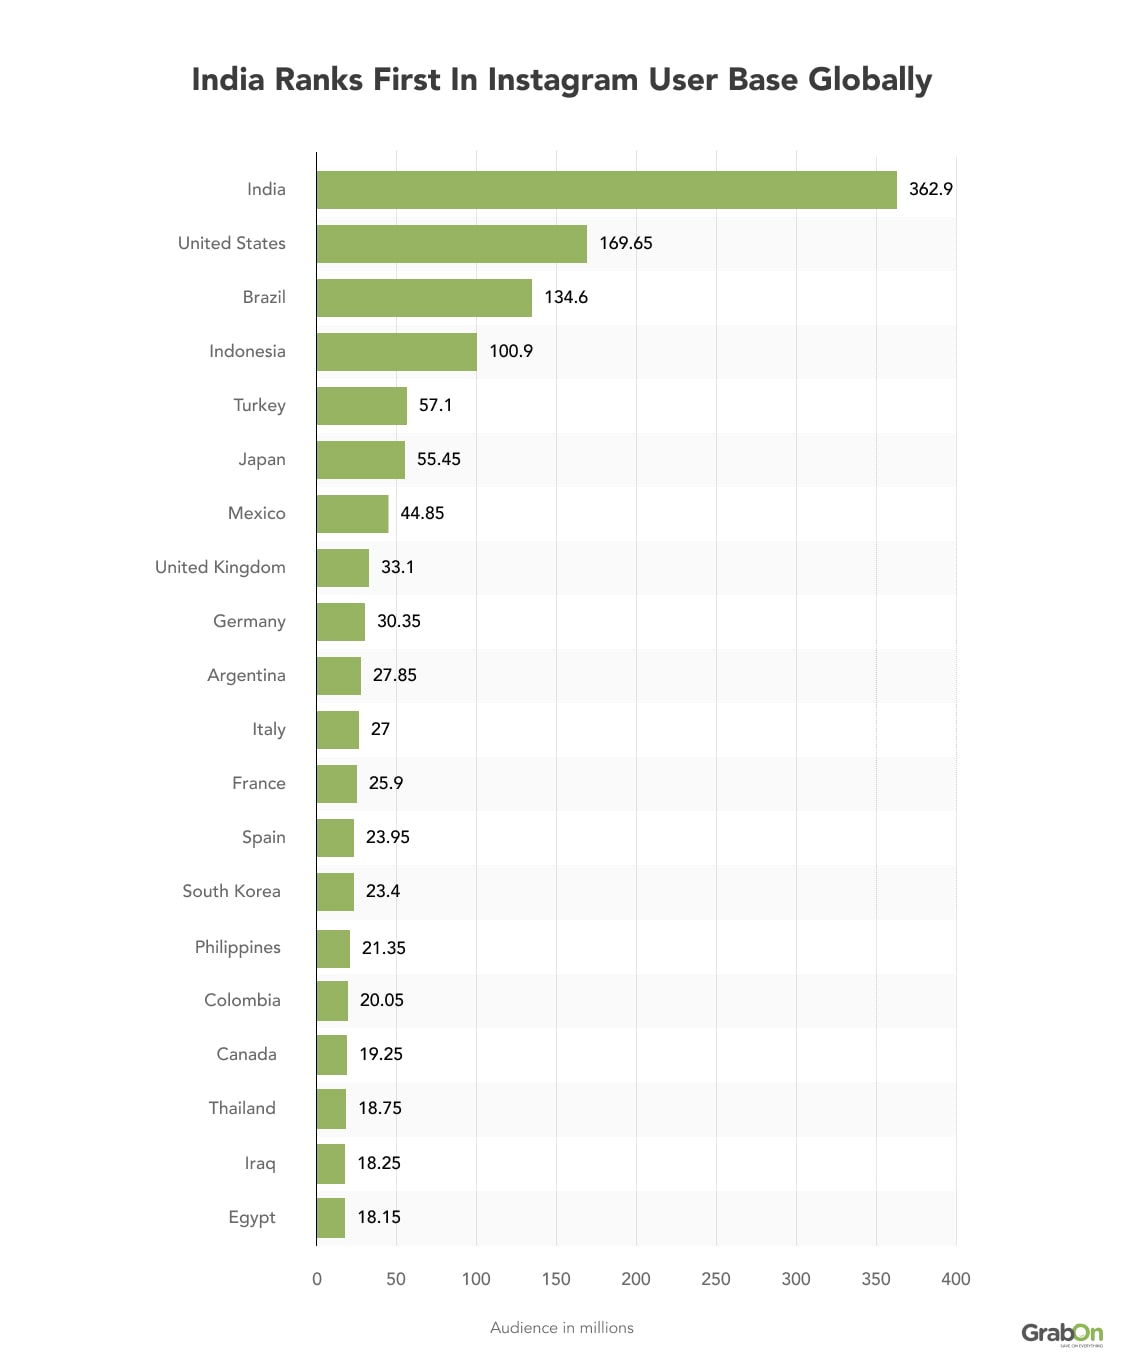 India ranks first in Instagram user base globally